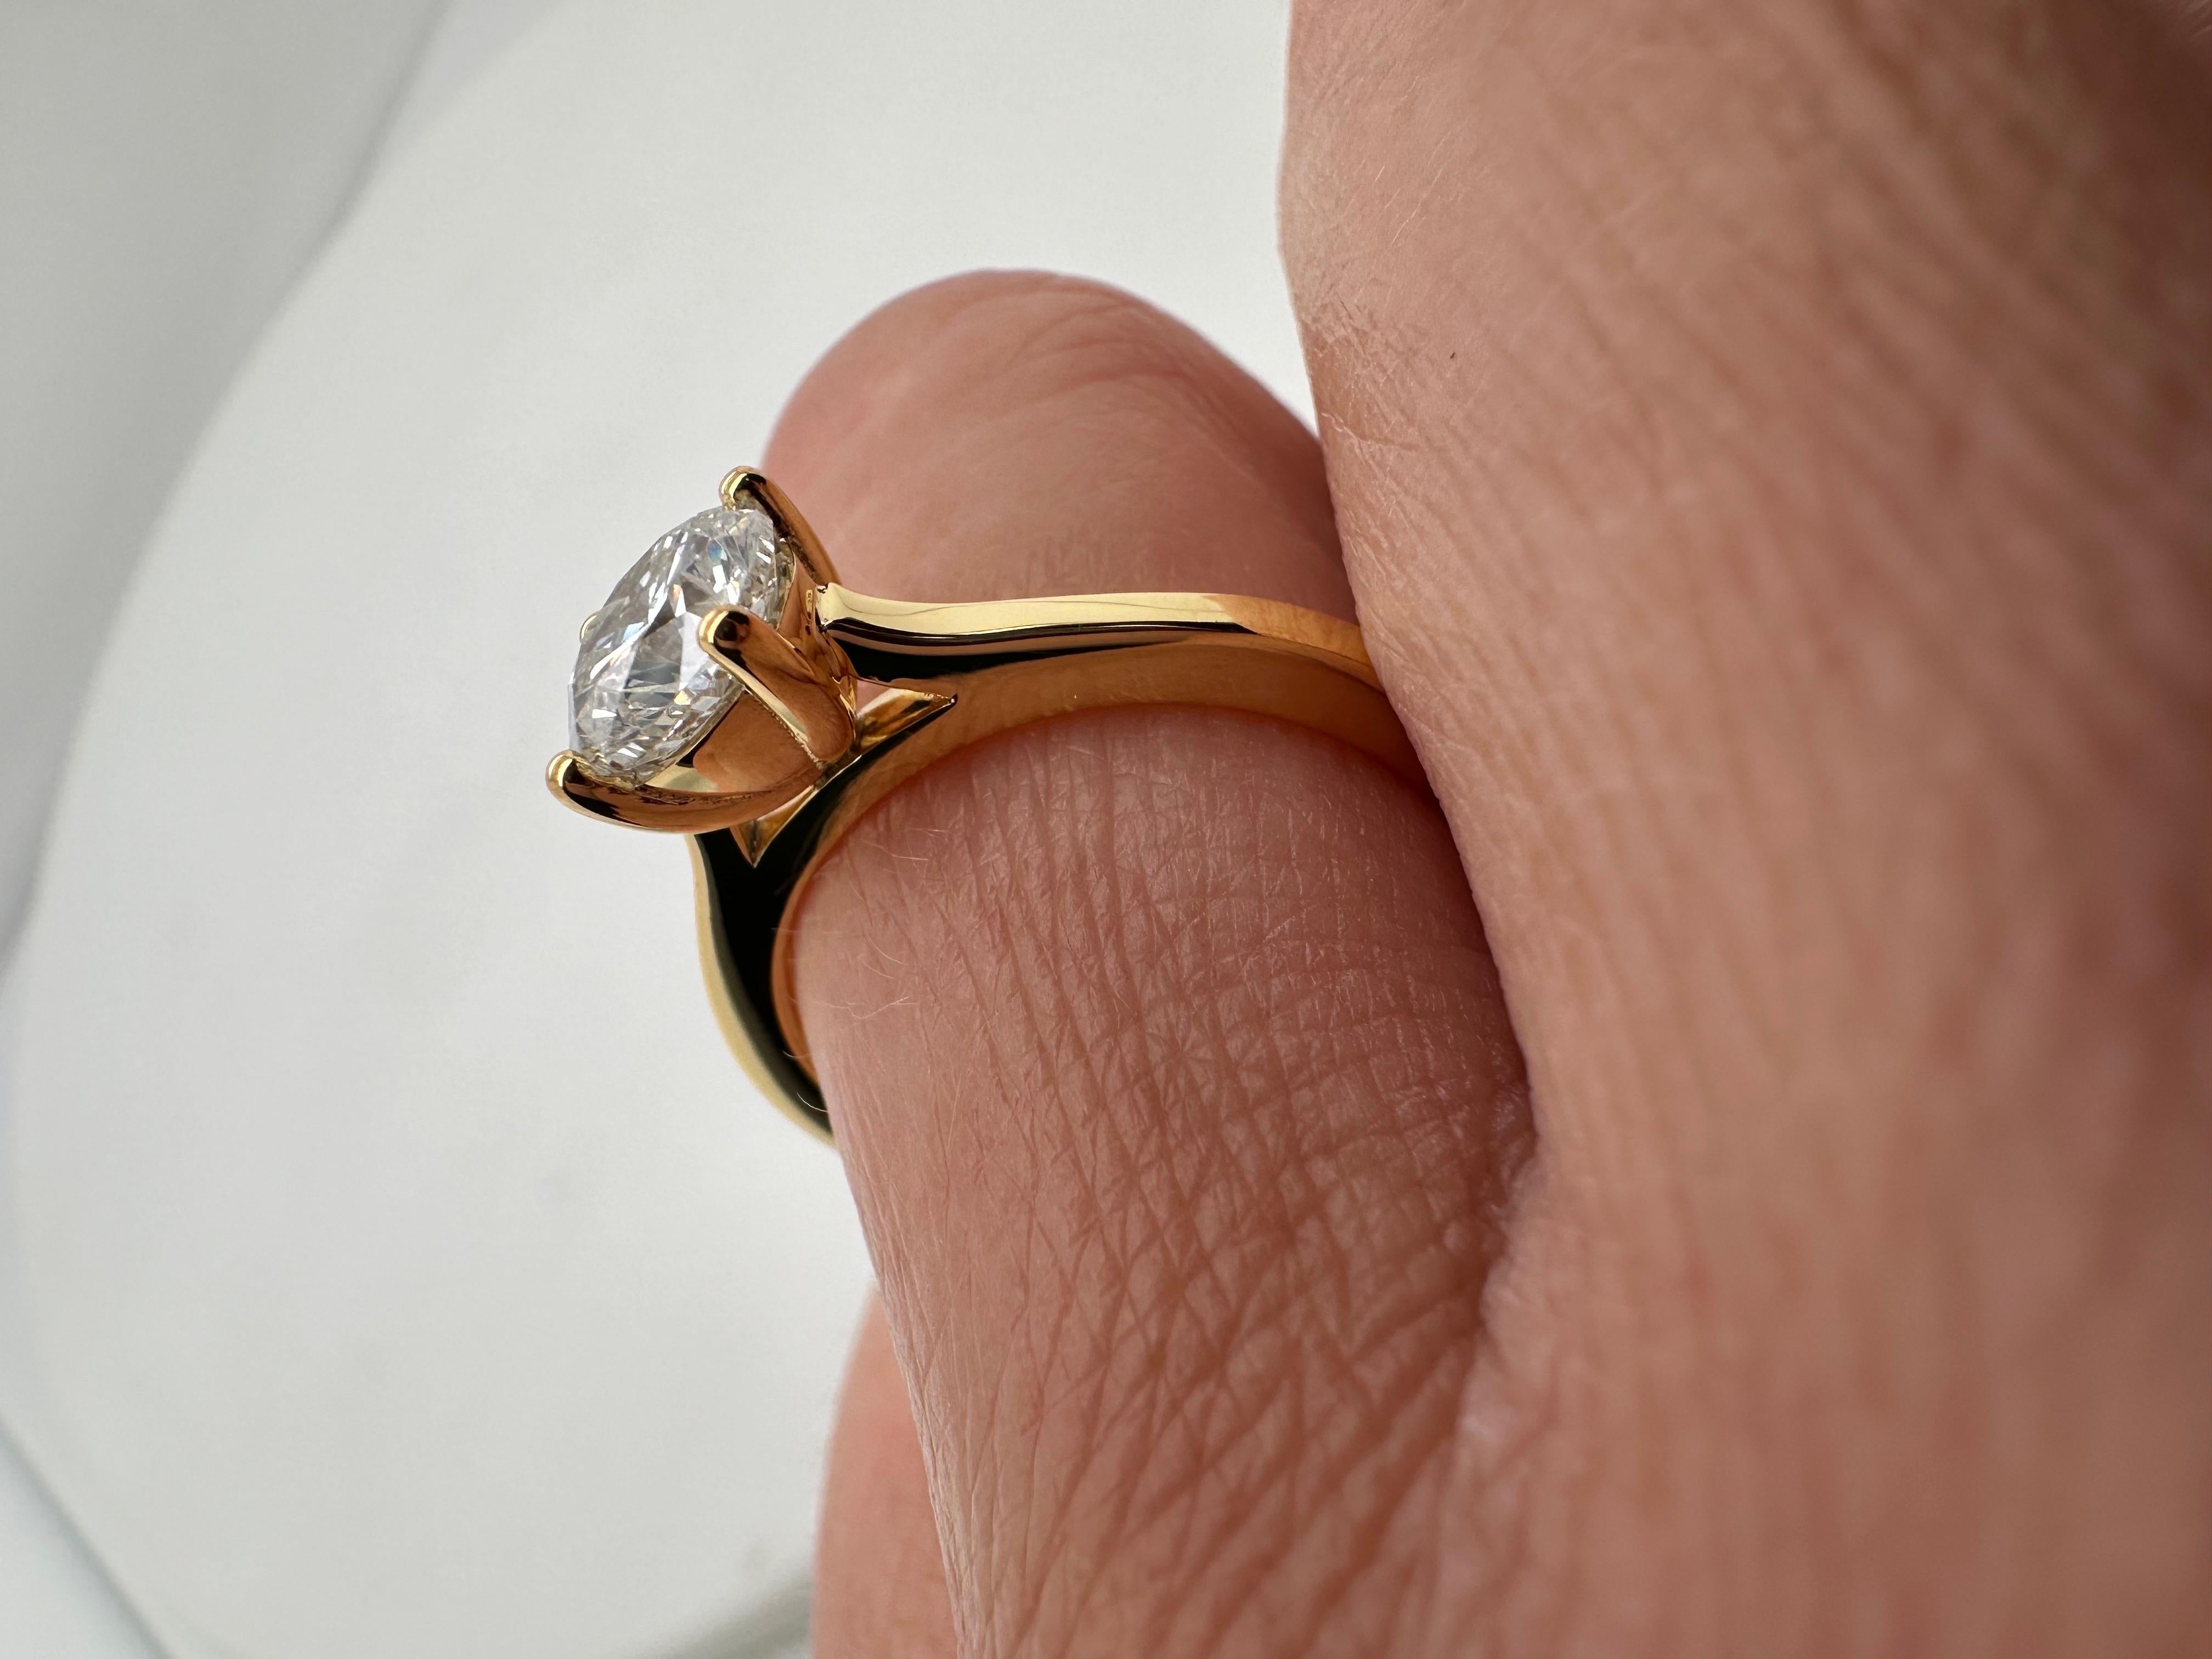 1ct Diamond solitire ring engagement ring 18KT yellow gold In New Condition For Sale In Boca Raton, FL